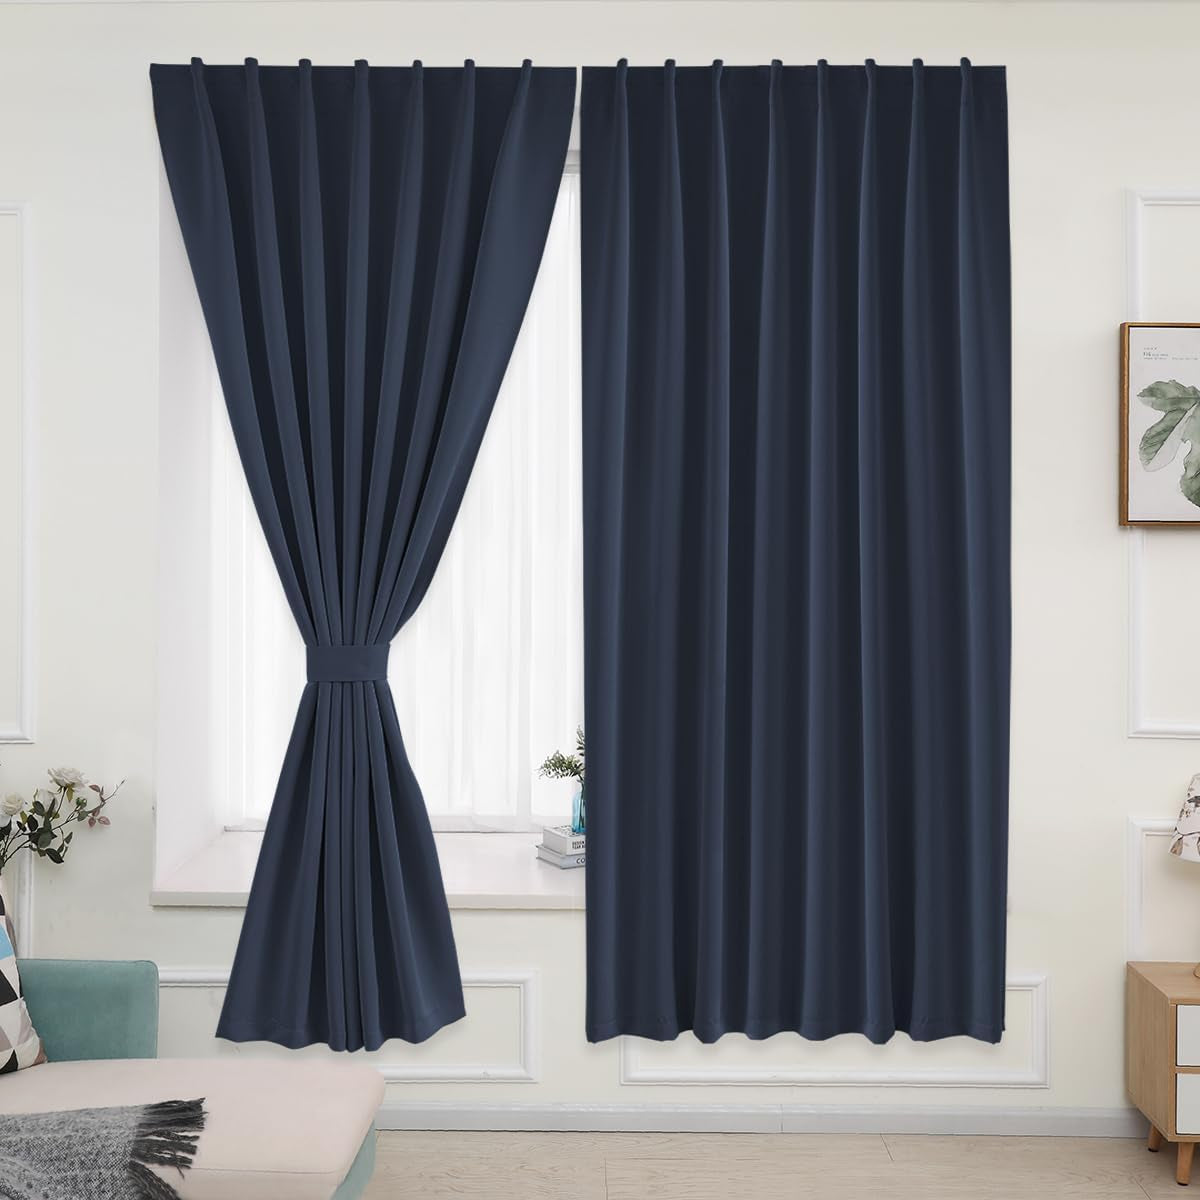 Muamar 2Pcs Blackout Curtains Privacy Curtains 63 Inch Length Window Curtains,Easy Install Thermal Insulated Window Shades,Stick Curtains No Rods, Black 42" W X 63" L  Muamar Navy Blue 52"W X 84"L 